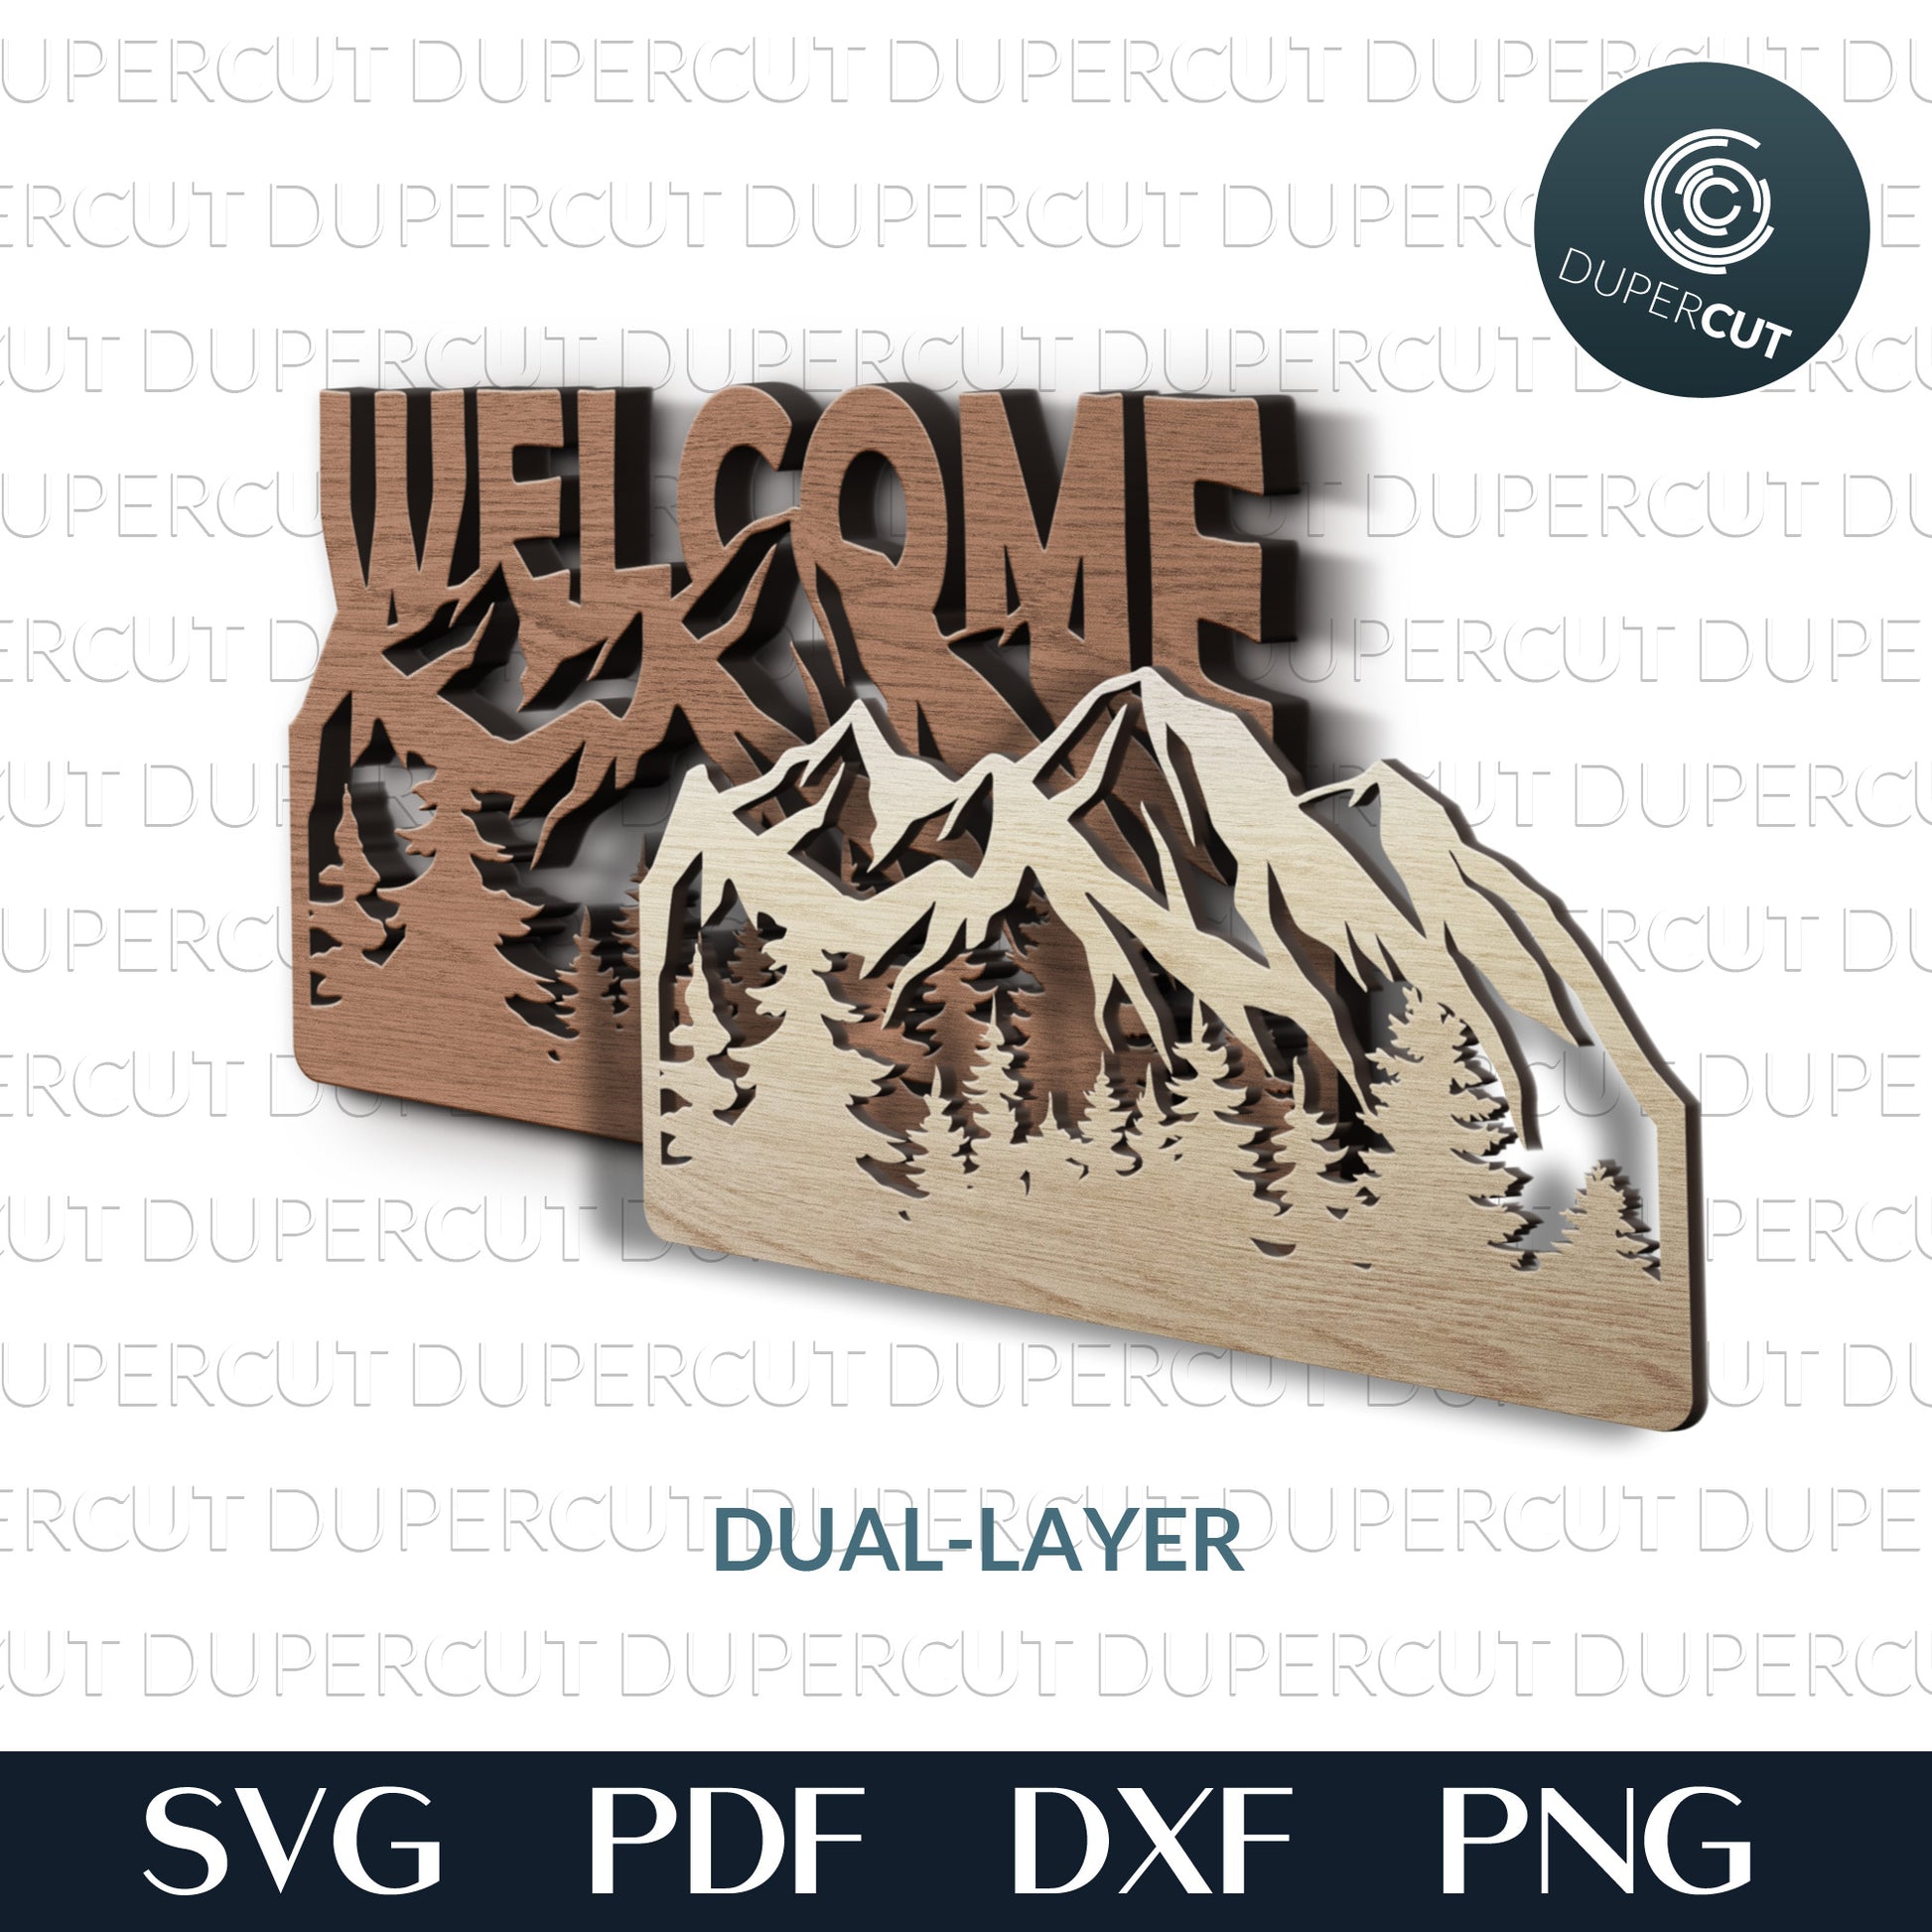 Welcome signs bundle - mountain scene - dual layer laser cutting files - SVG PDF DXF vector designs for Glowforge, Cricut, Silhouette Cameo, CNC plasma machines by DuperCut